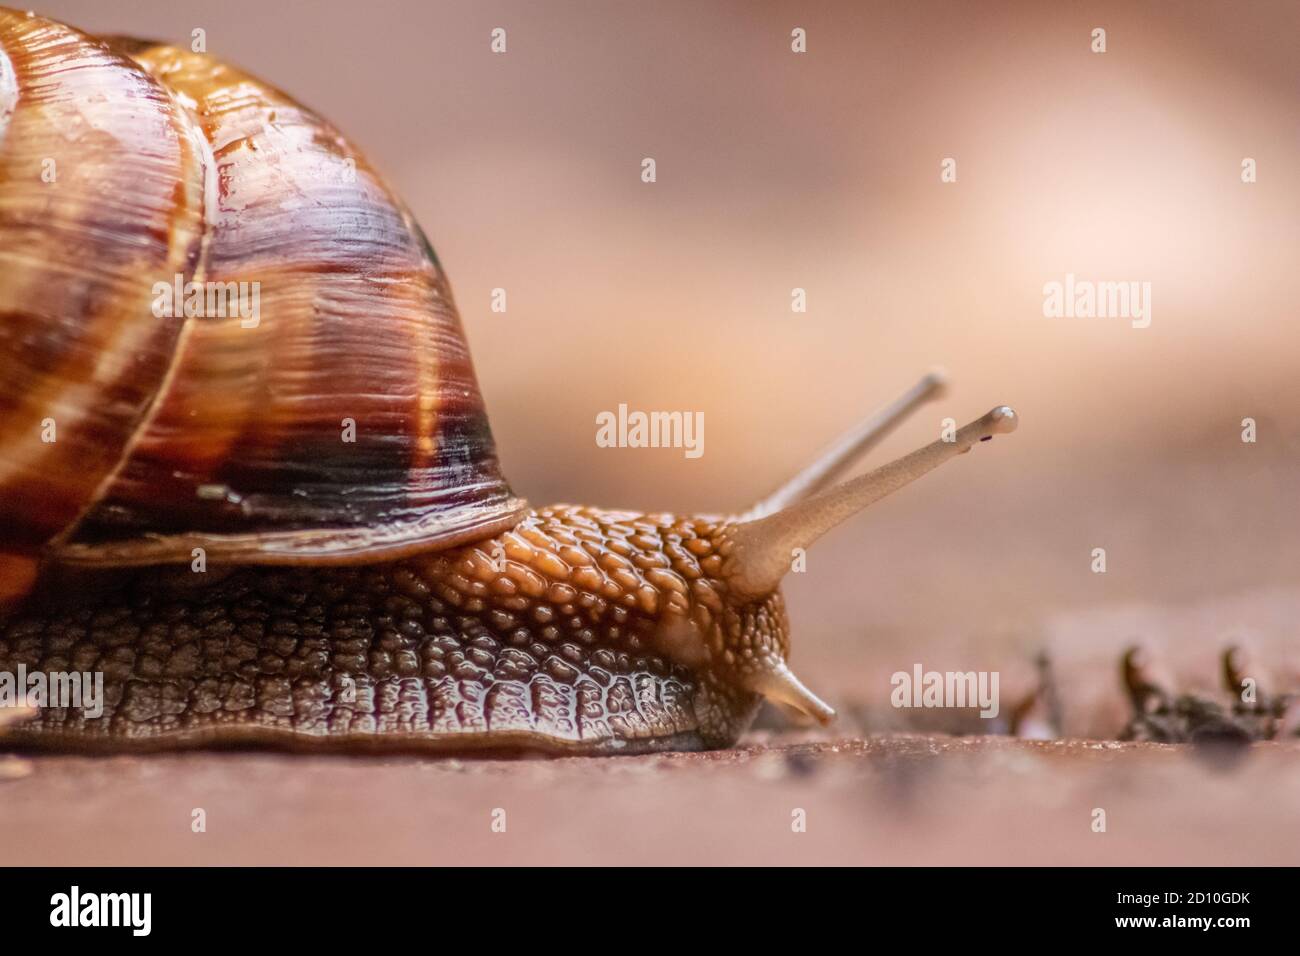 Big striped grapevine snail with a big shell in close-up and macro view shows interesting details of feelers, eyes, helix shell, skin and foot Stock Photo